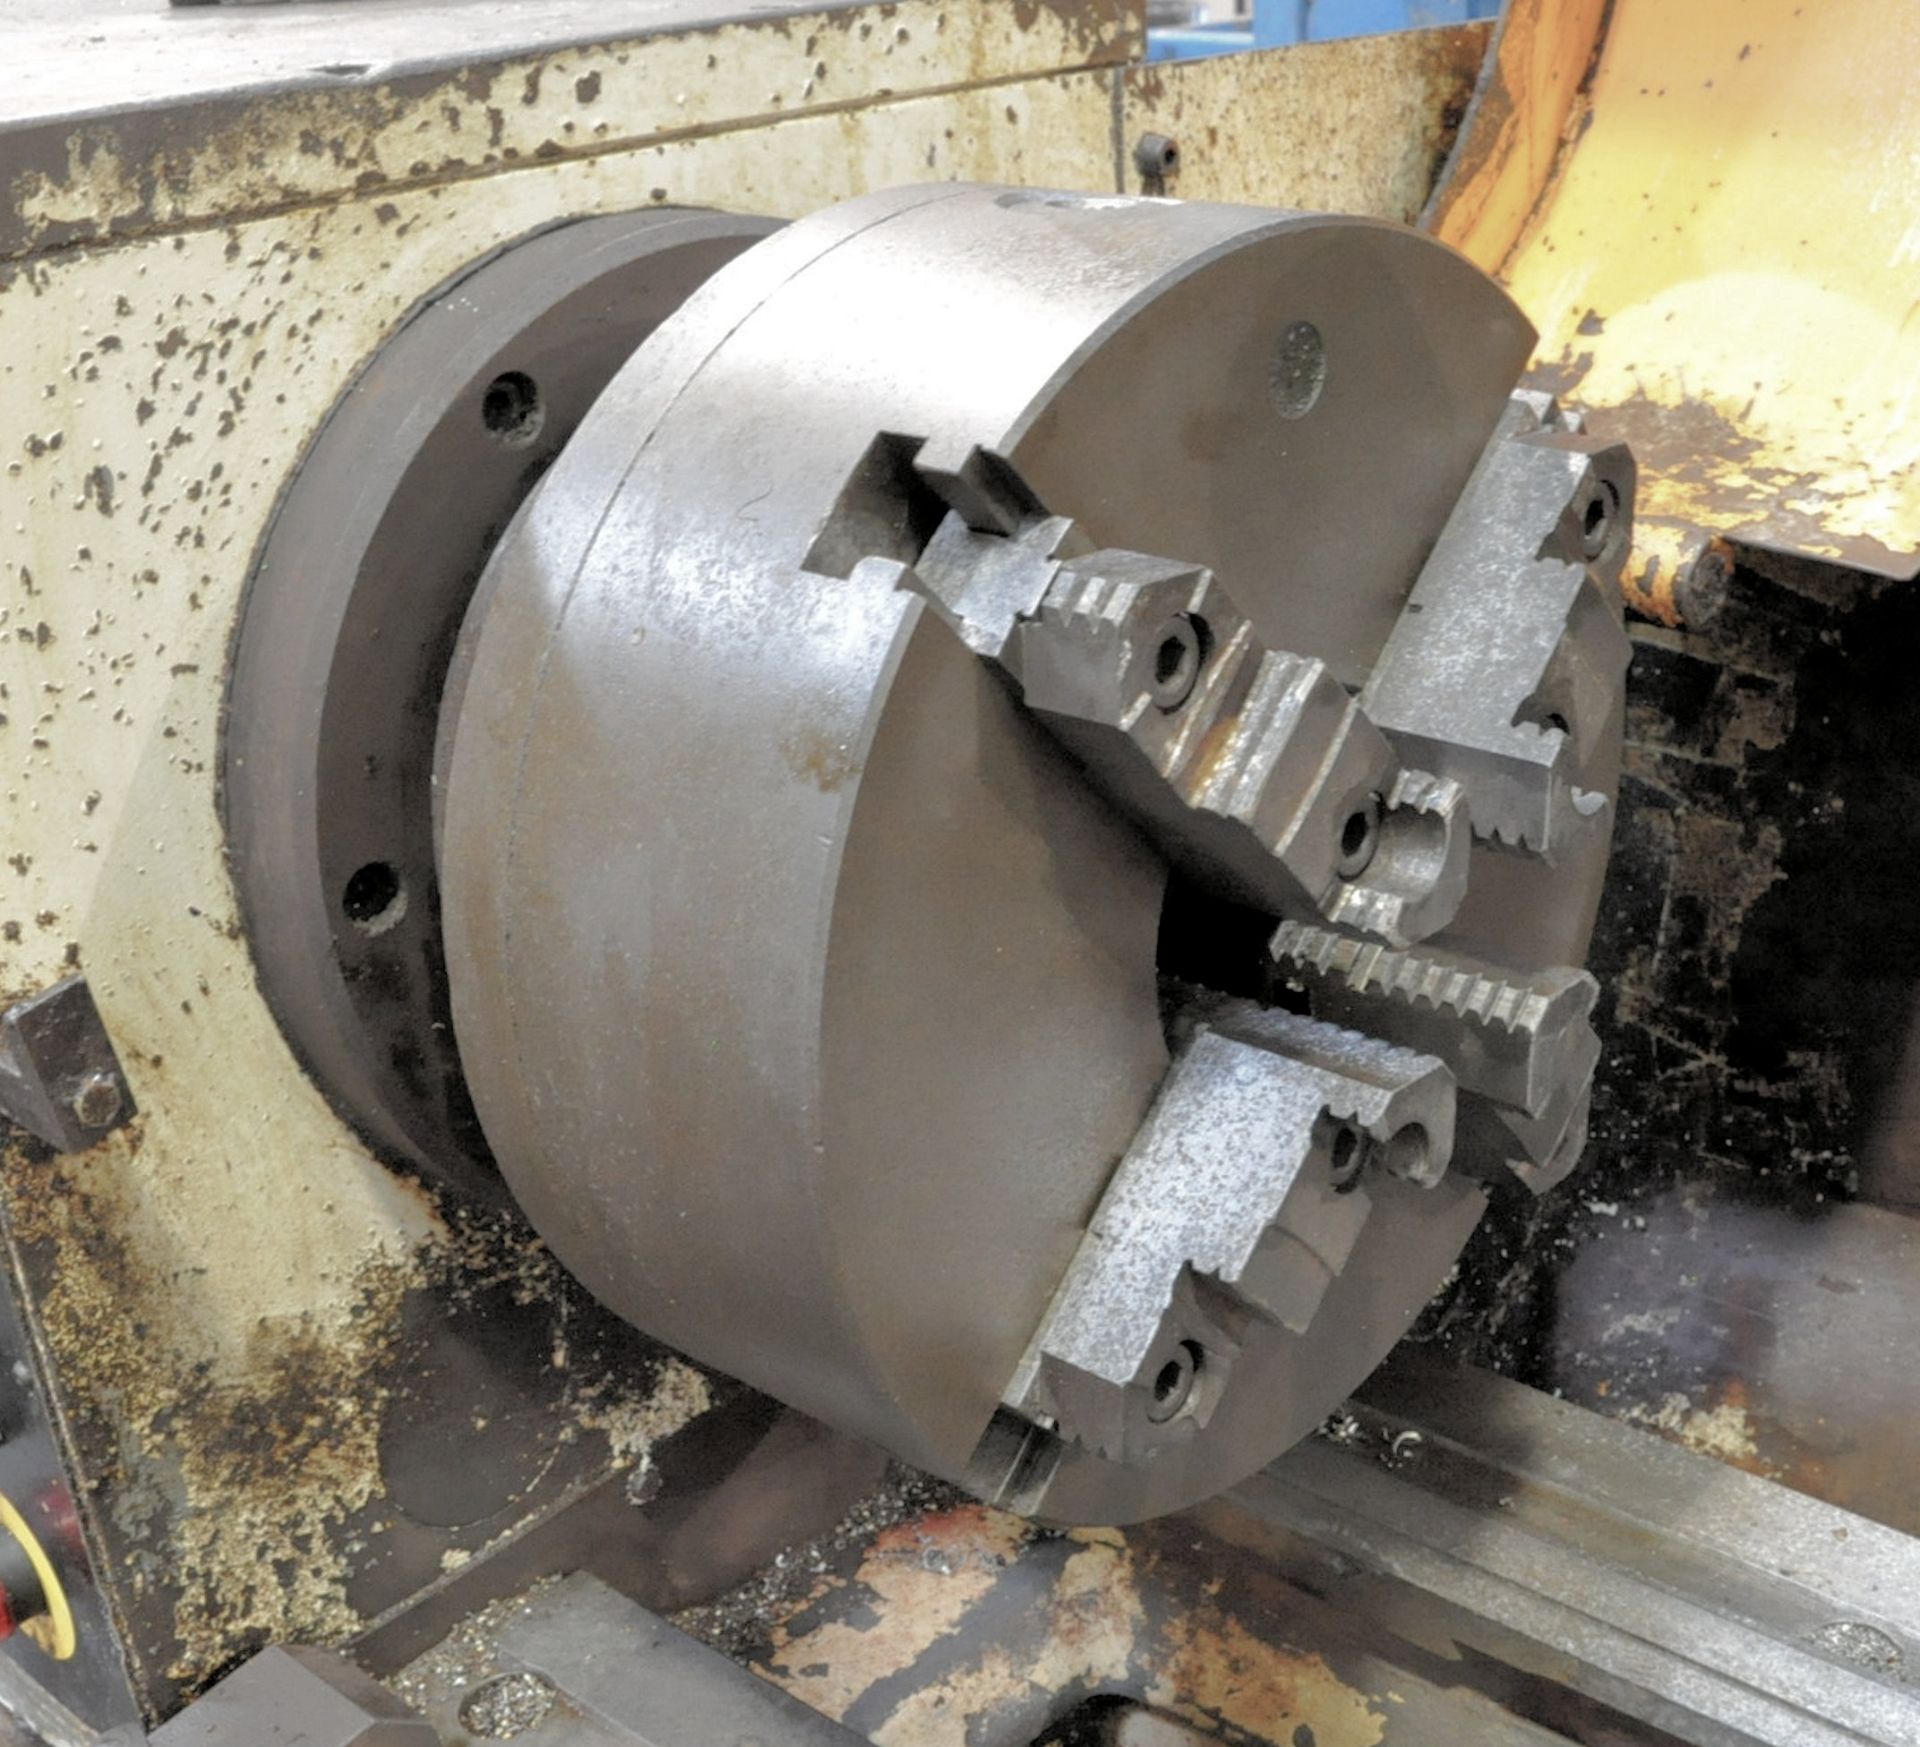 Summit Model 20X120 B, 20" x 120" Geared Head Engine Lathe,12" 4-Jaw Chuck, 4" Hole Through Spindle - Image 4 of 8